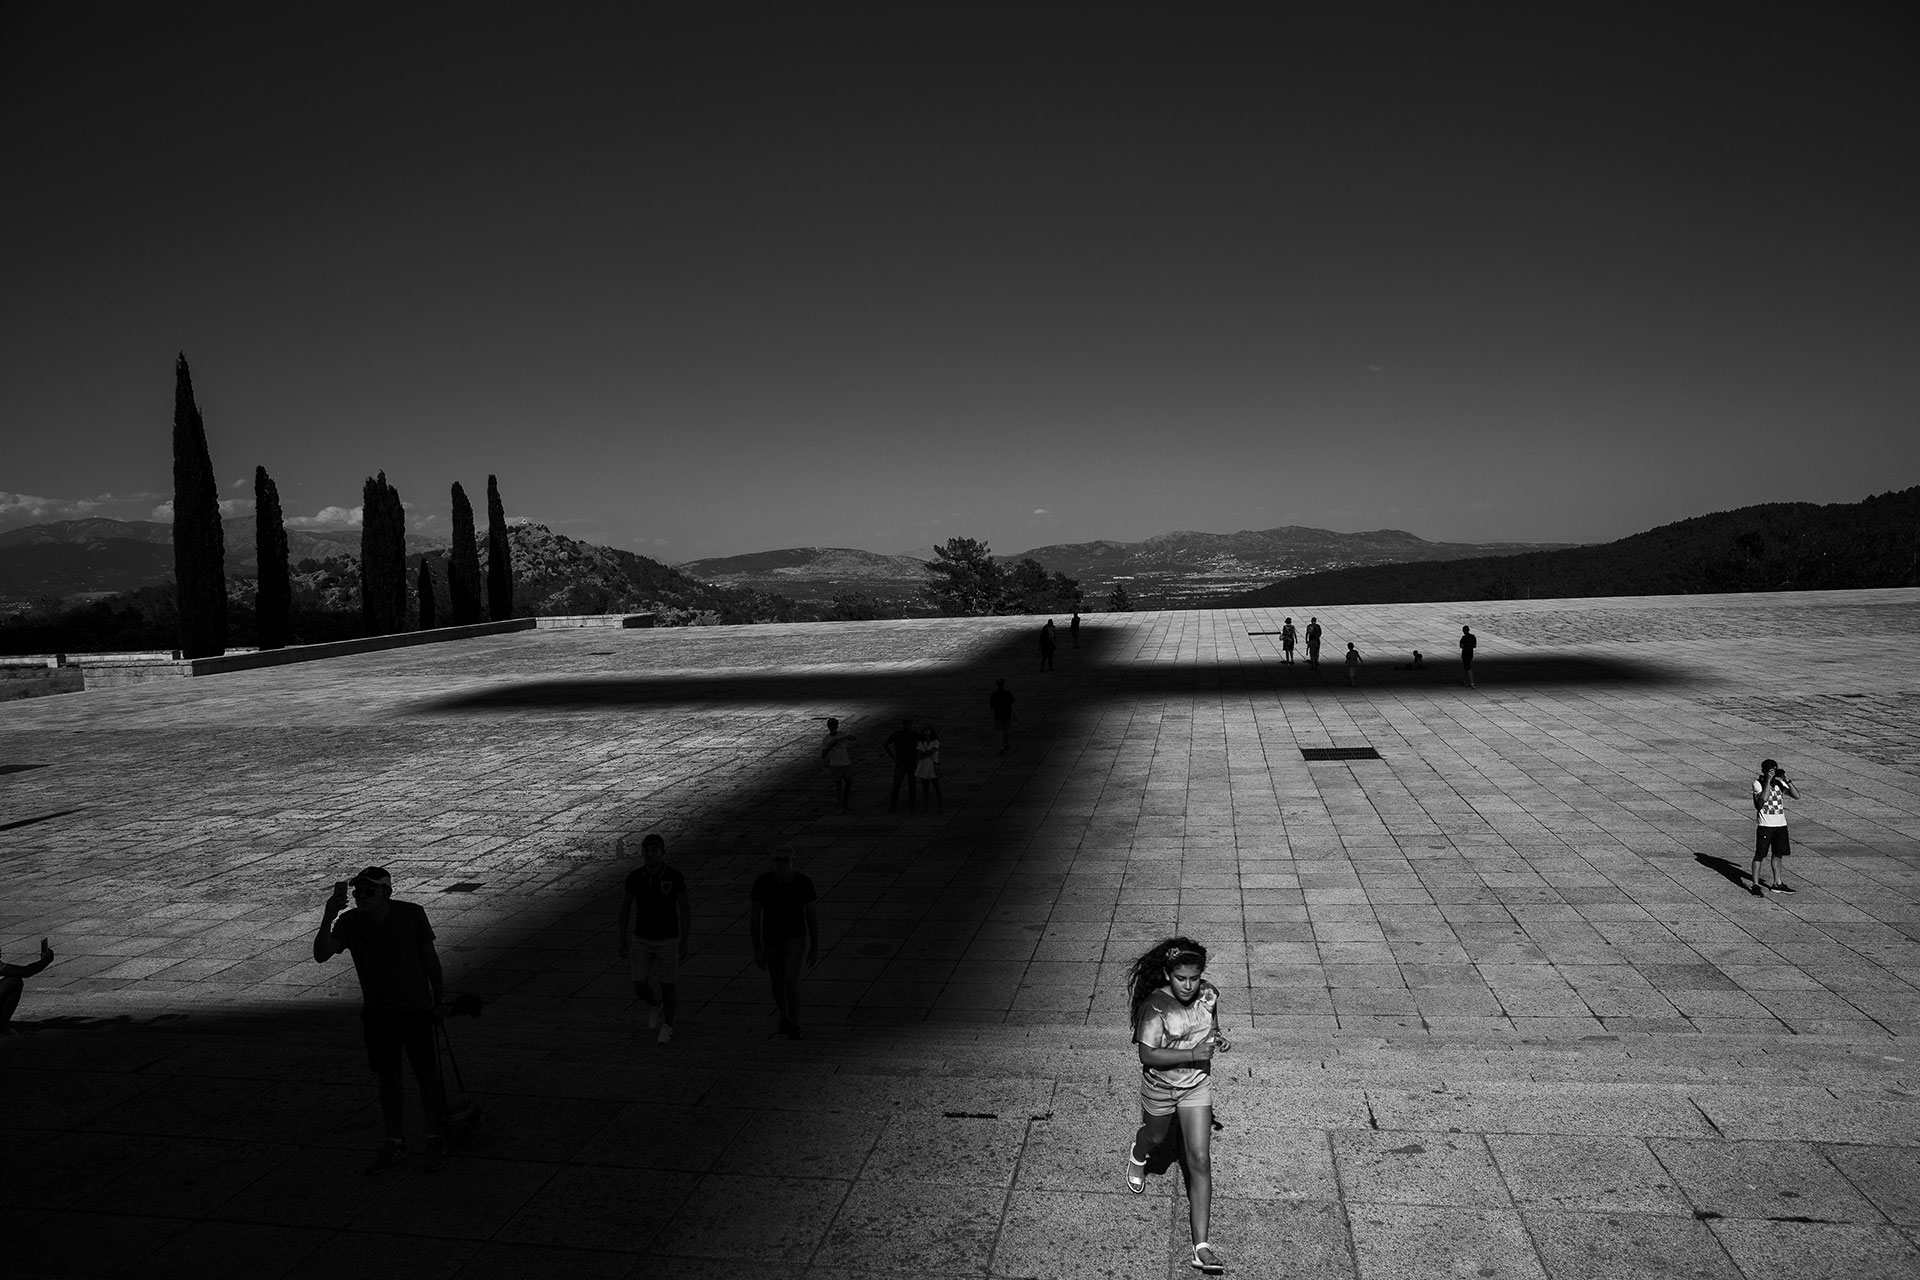 A girl runs across the esplanade of the Valle de los Caídos, a mausoleum where more than 30,000 people are still buried without the consent of their families.